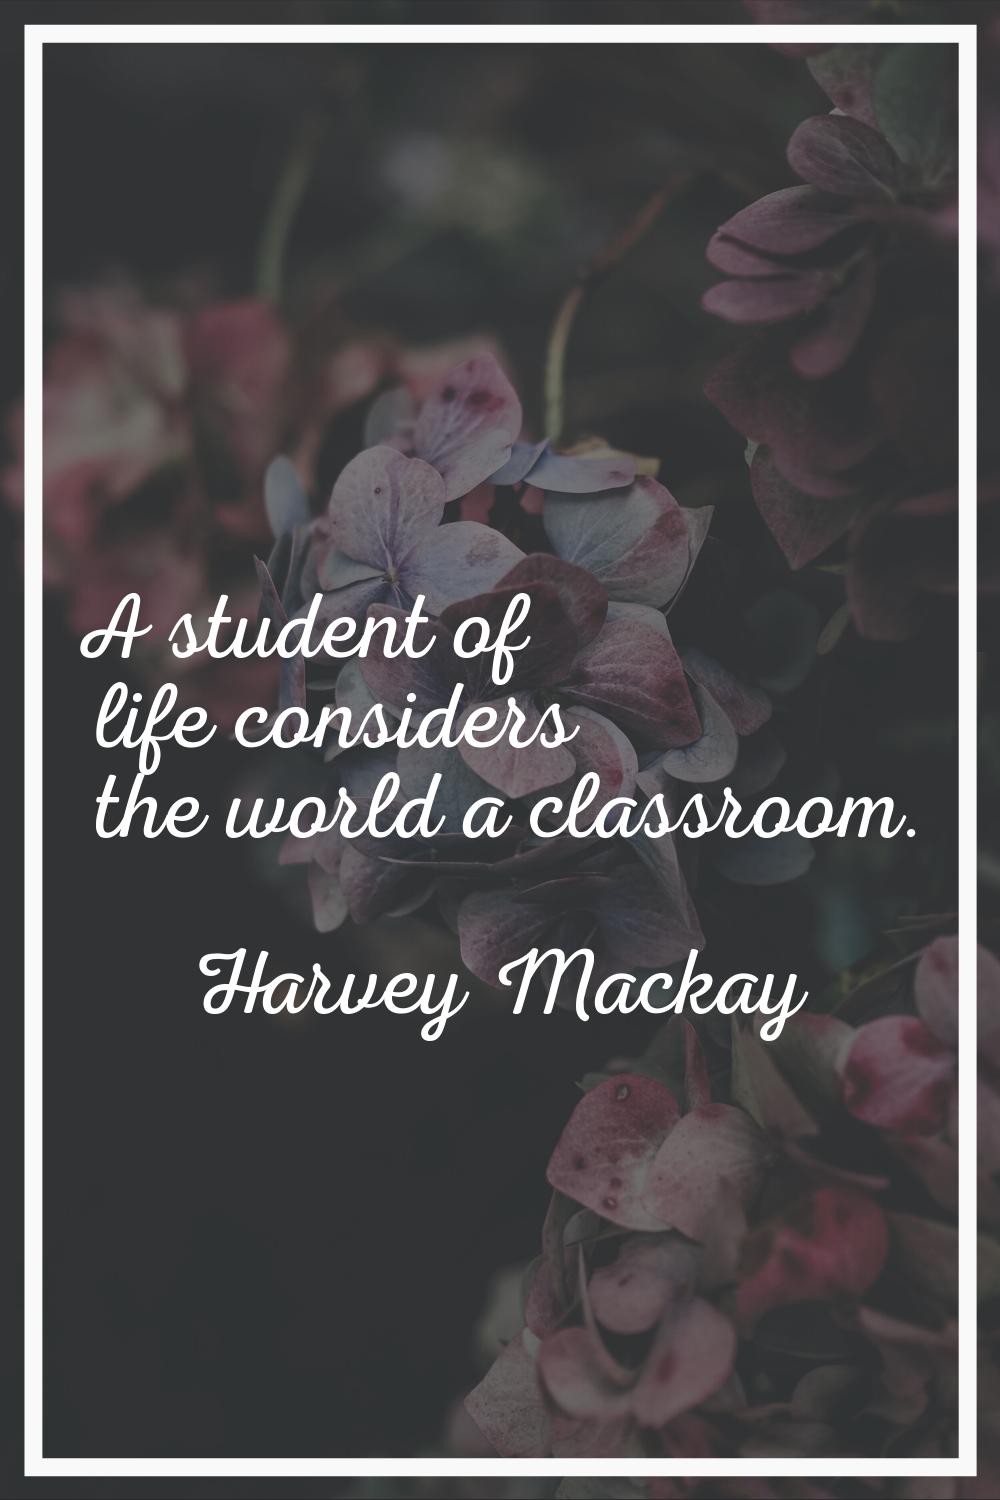 A student of life considers the world a classroom.